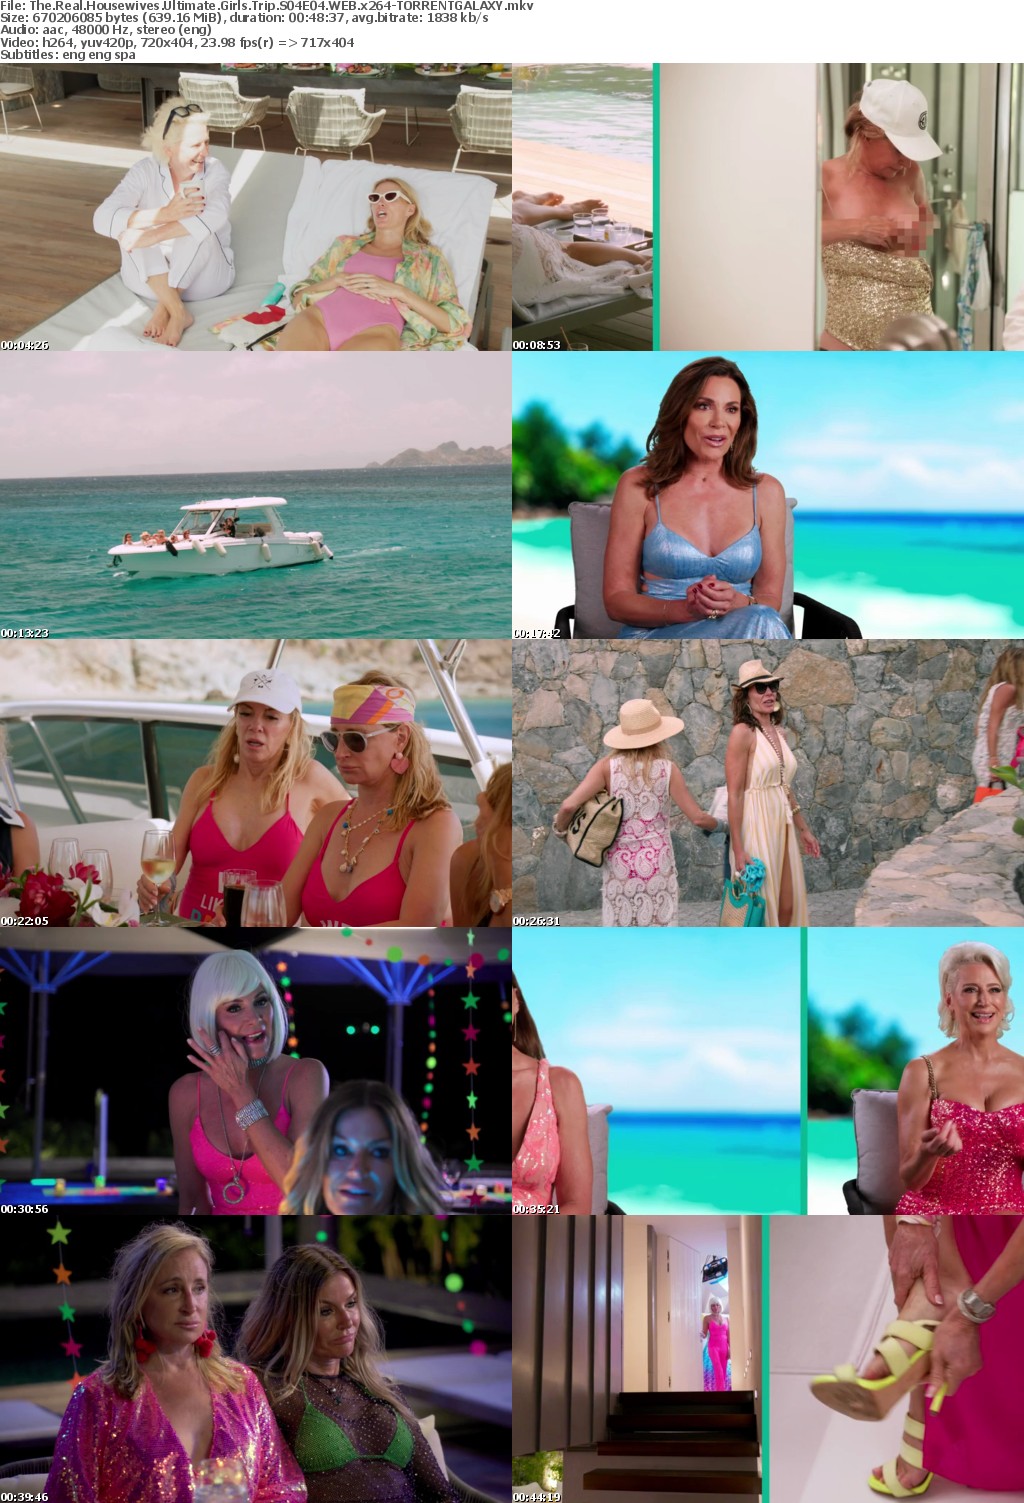 The Real Housewives Ultimate Girls Trip S04E04 WEB x264-GALAXY